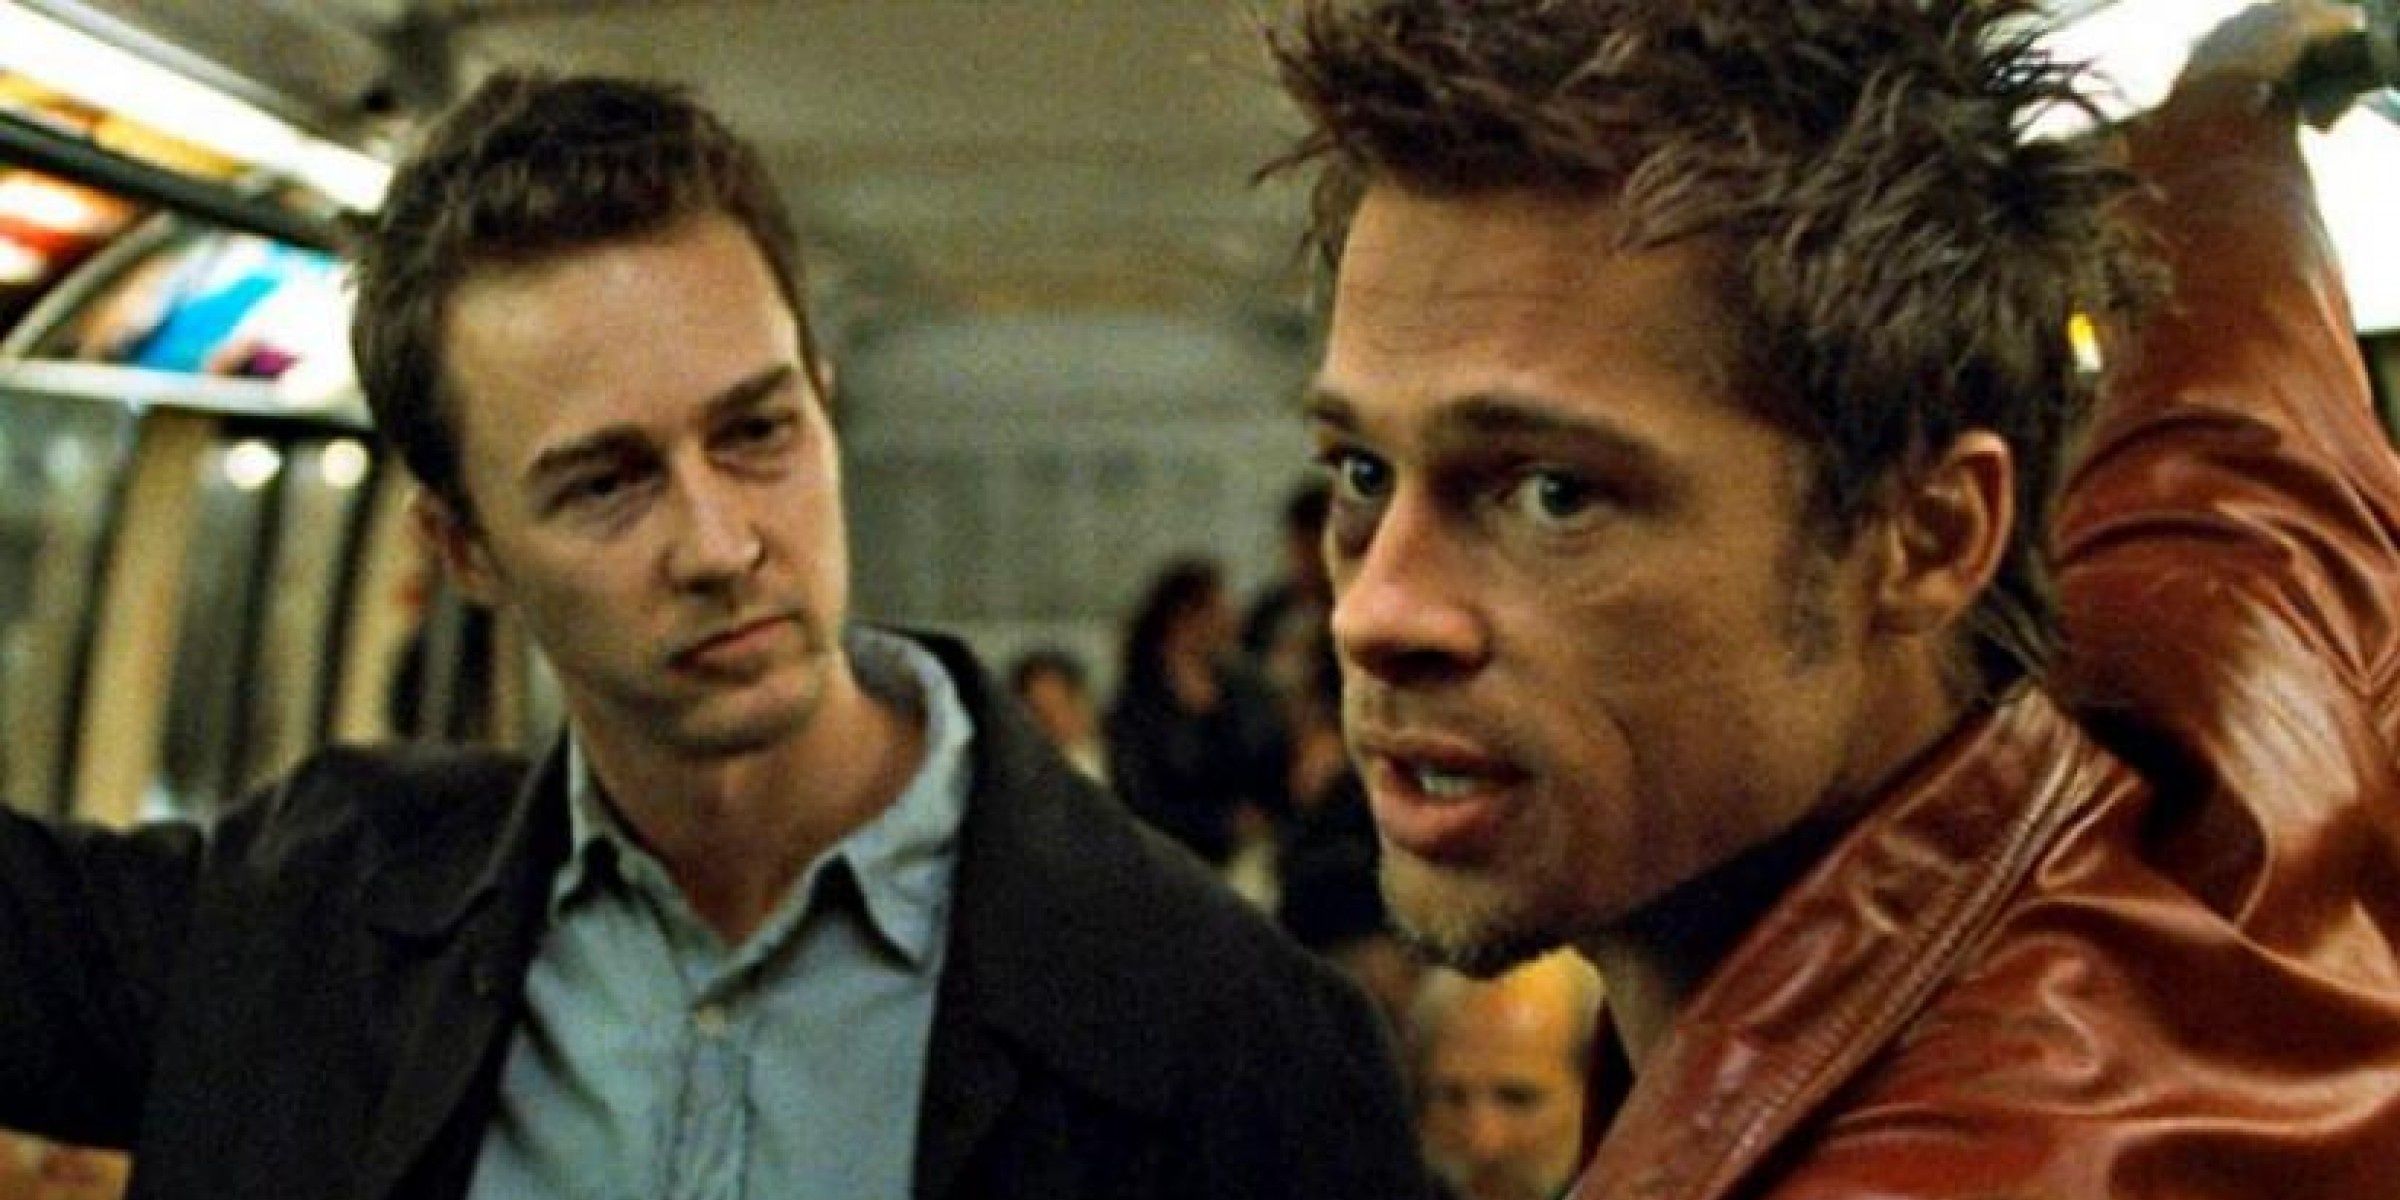 Edward Norton and Brad Pitt riding on a bus in Fight Club